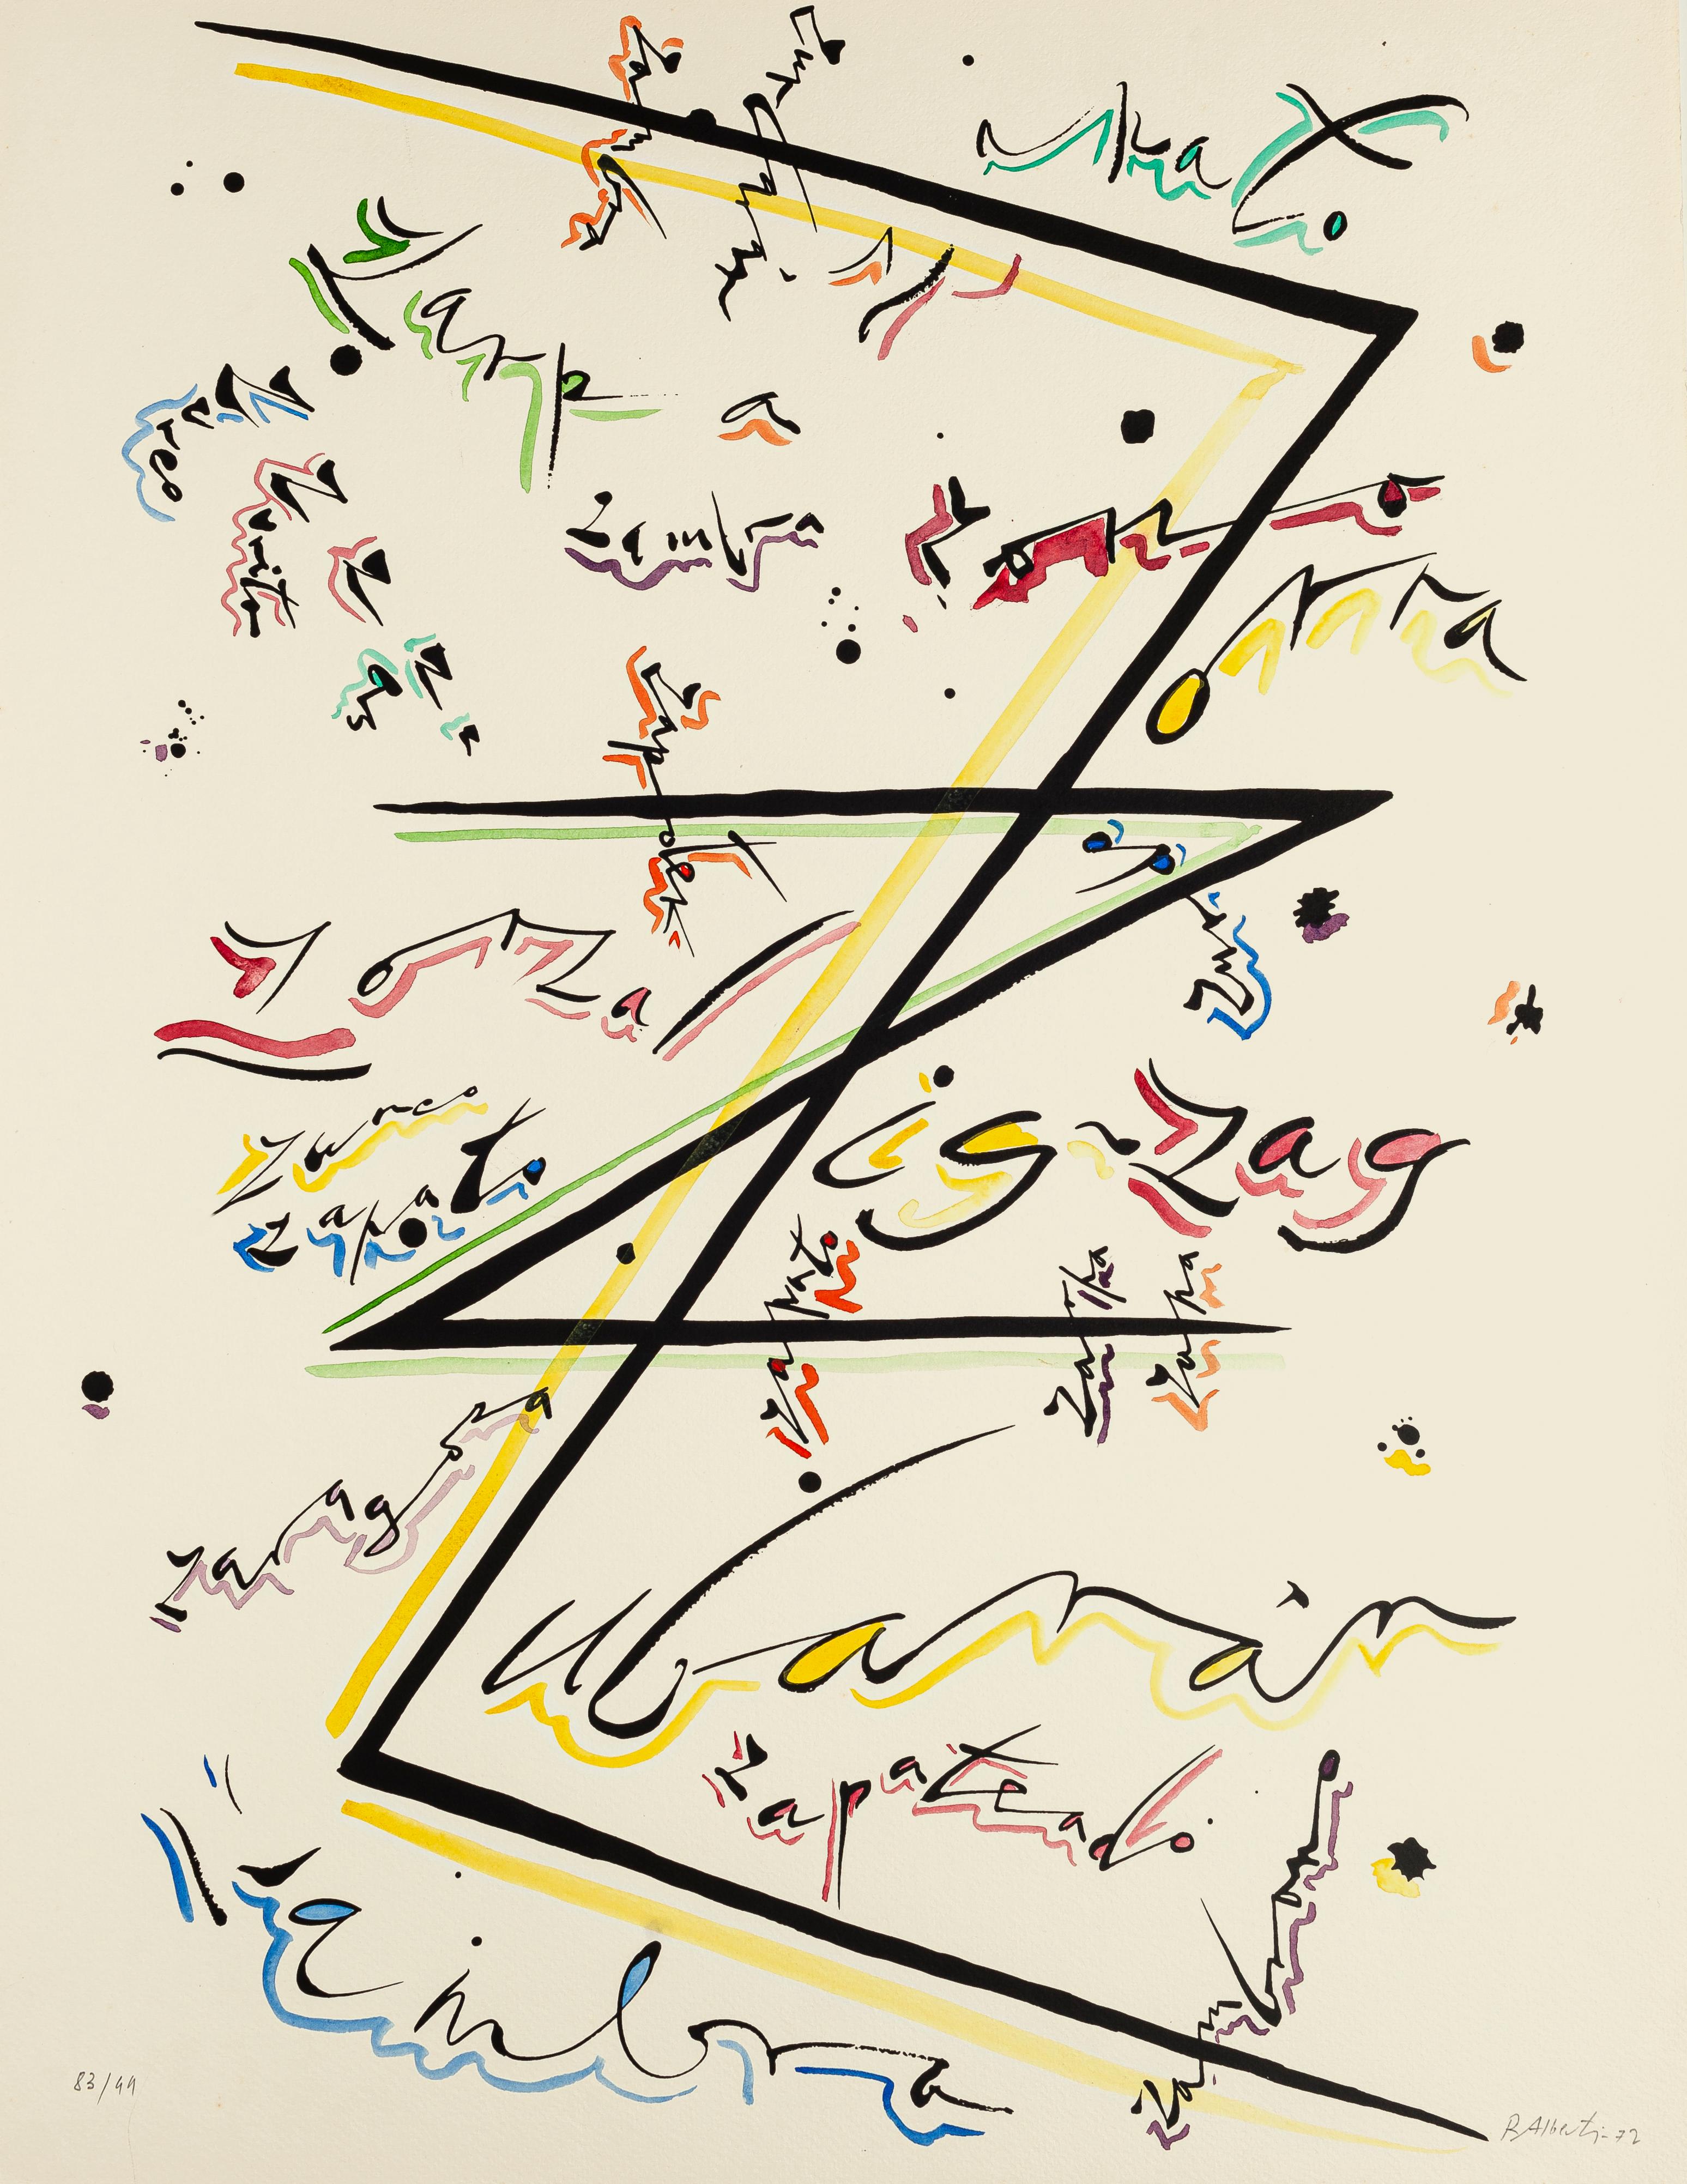 Rafael Alberti Abstract Print - Letter Z - Hand-Colored Lithograph by Raphael Alberti - 1972